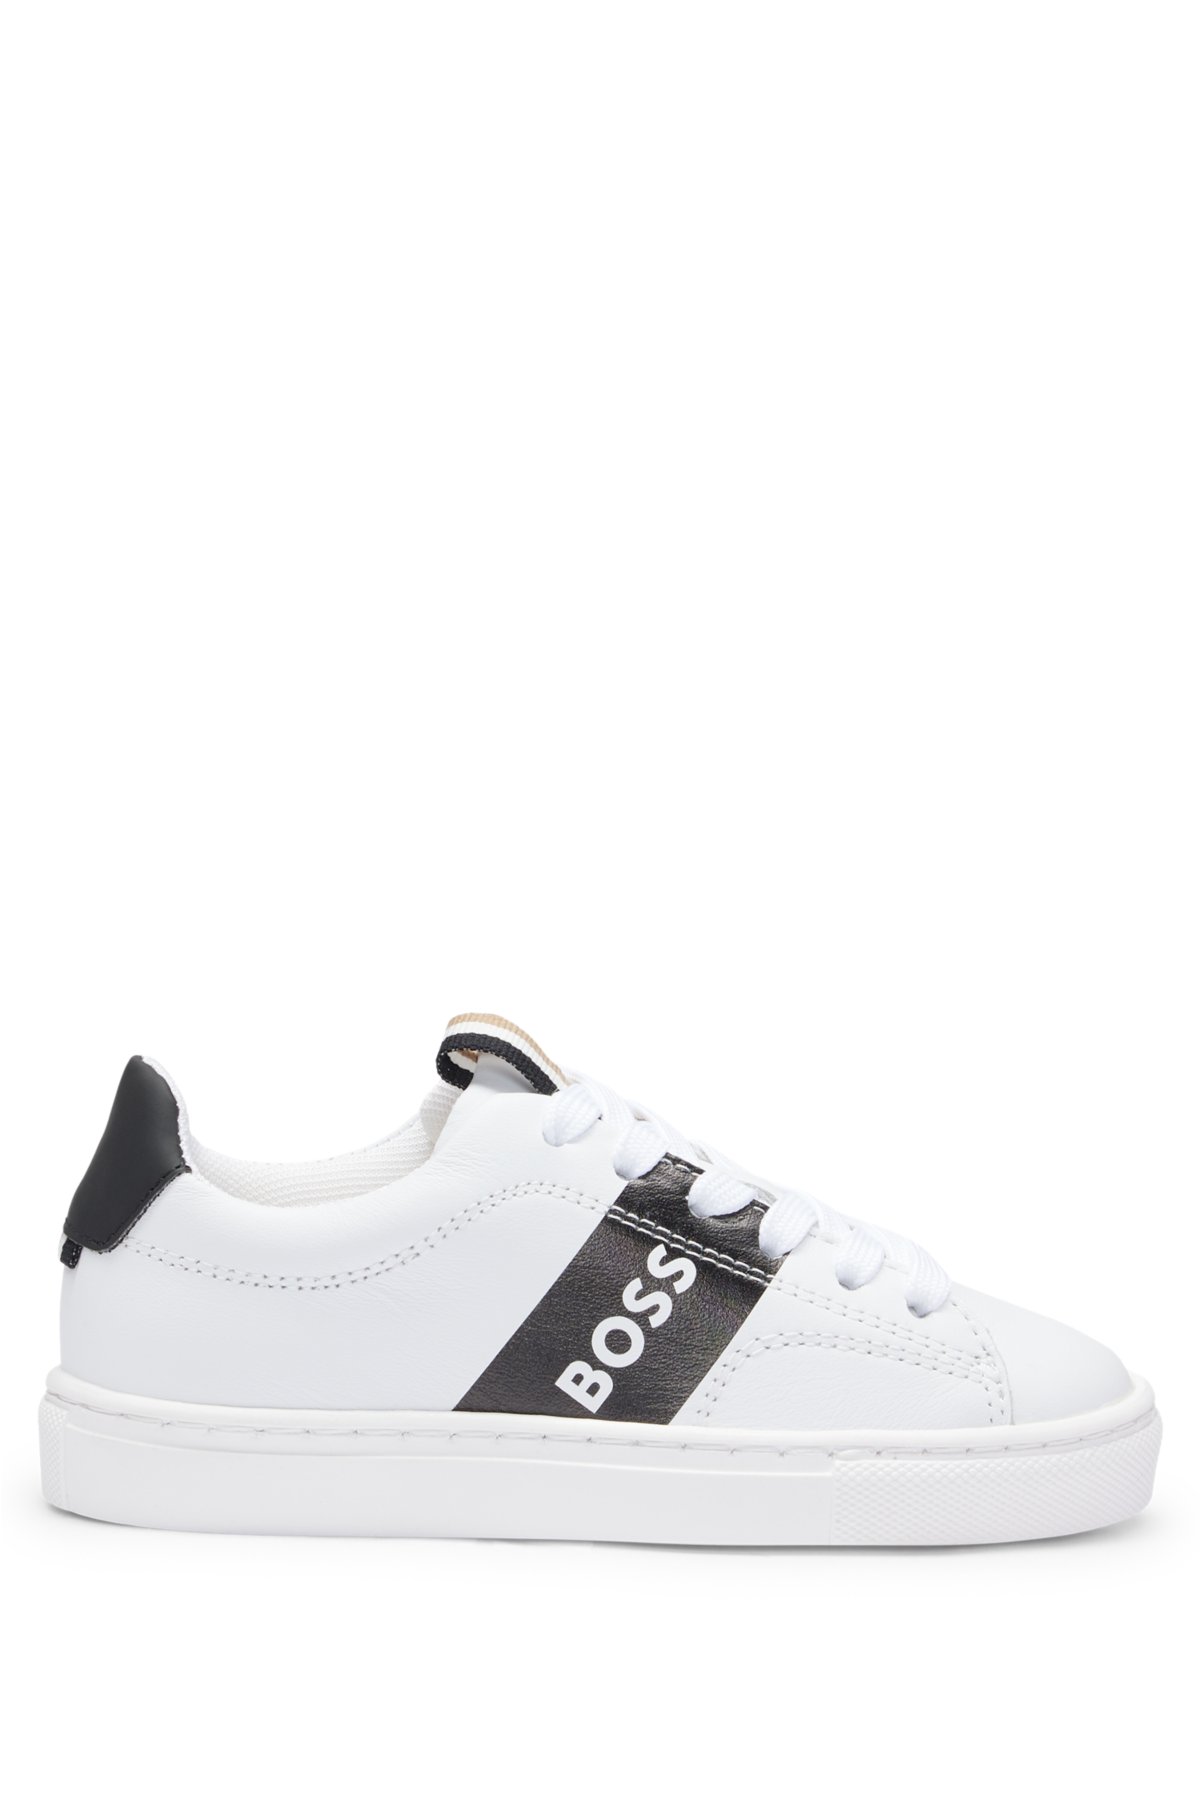 BOSS - Kids' leather trainers with logo stripe